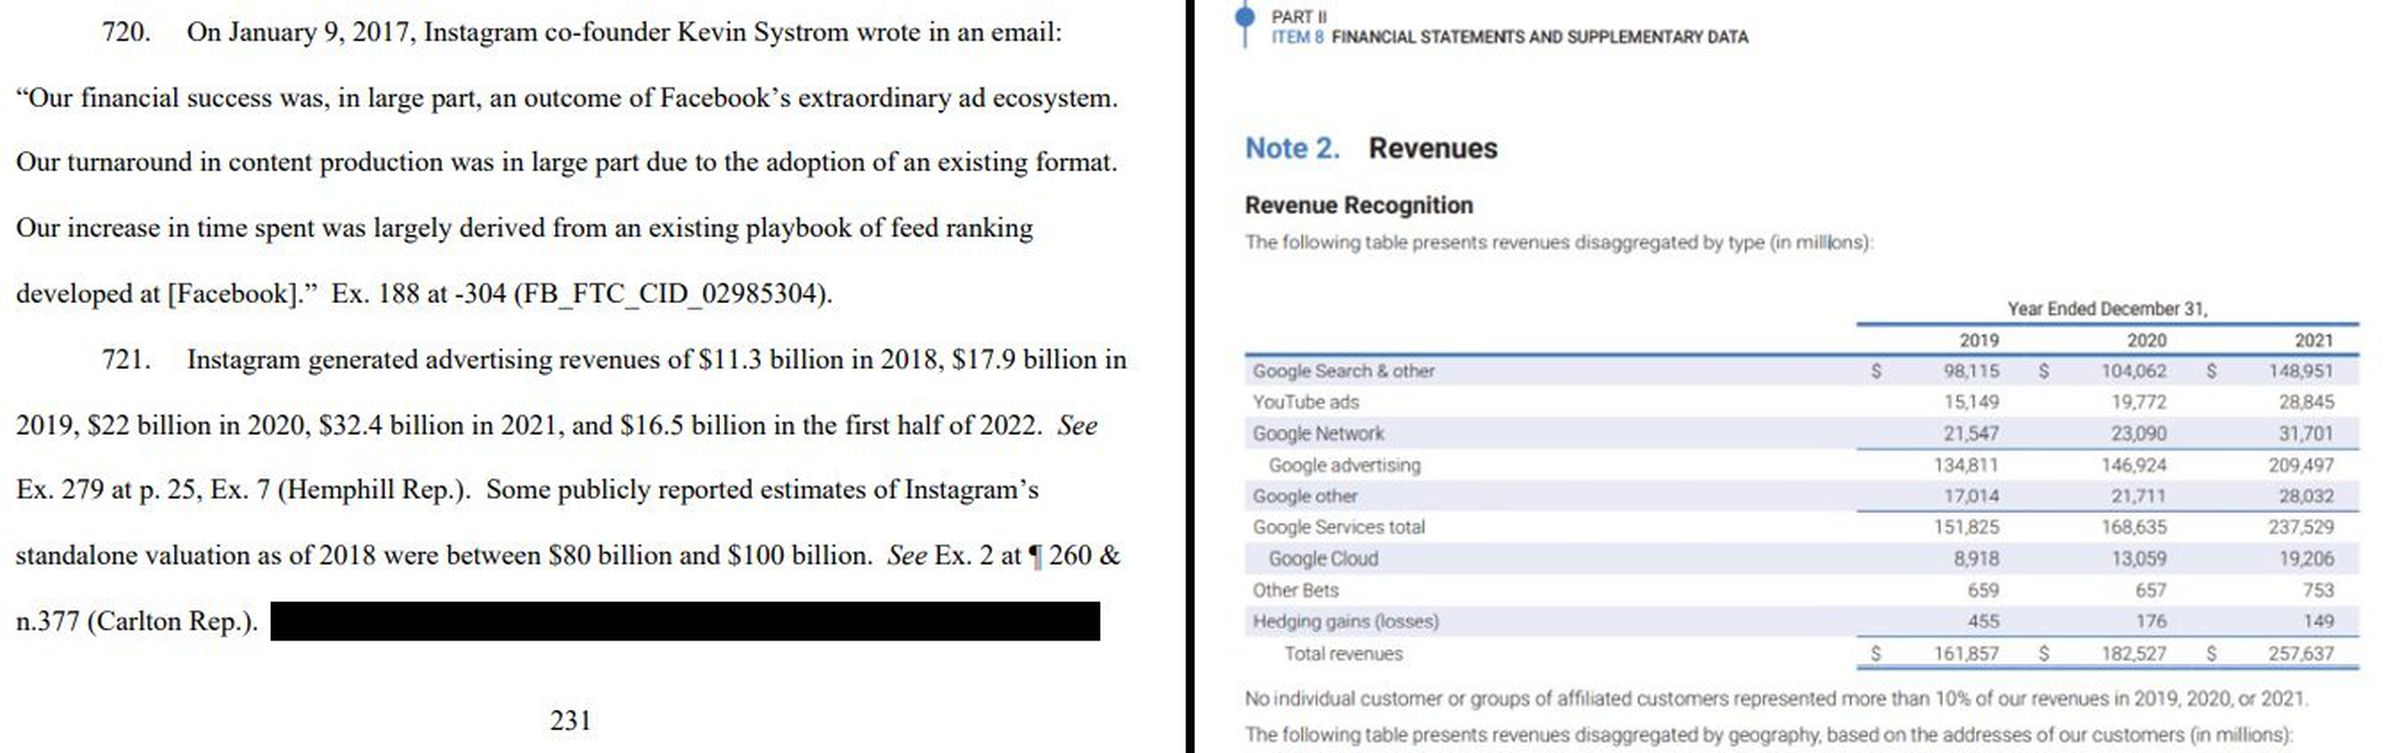 Google and Meta documents showing annual ad revenue for Instagram and YouTube